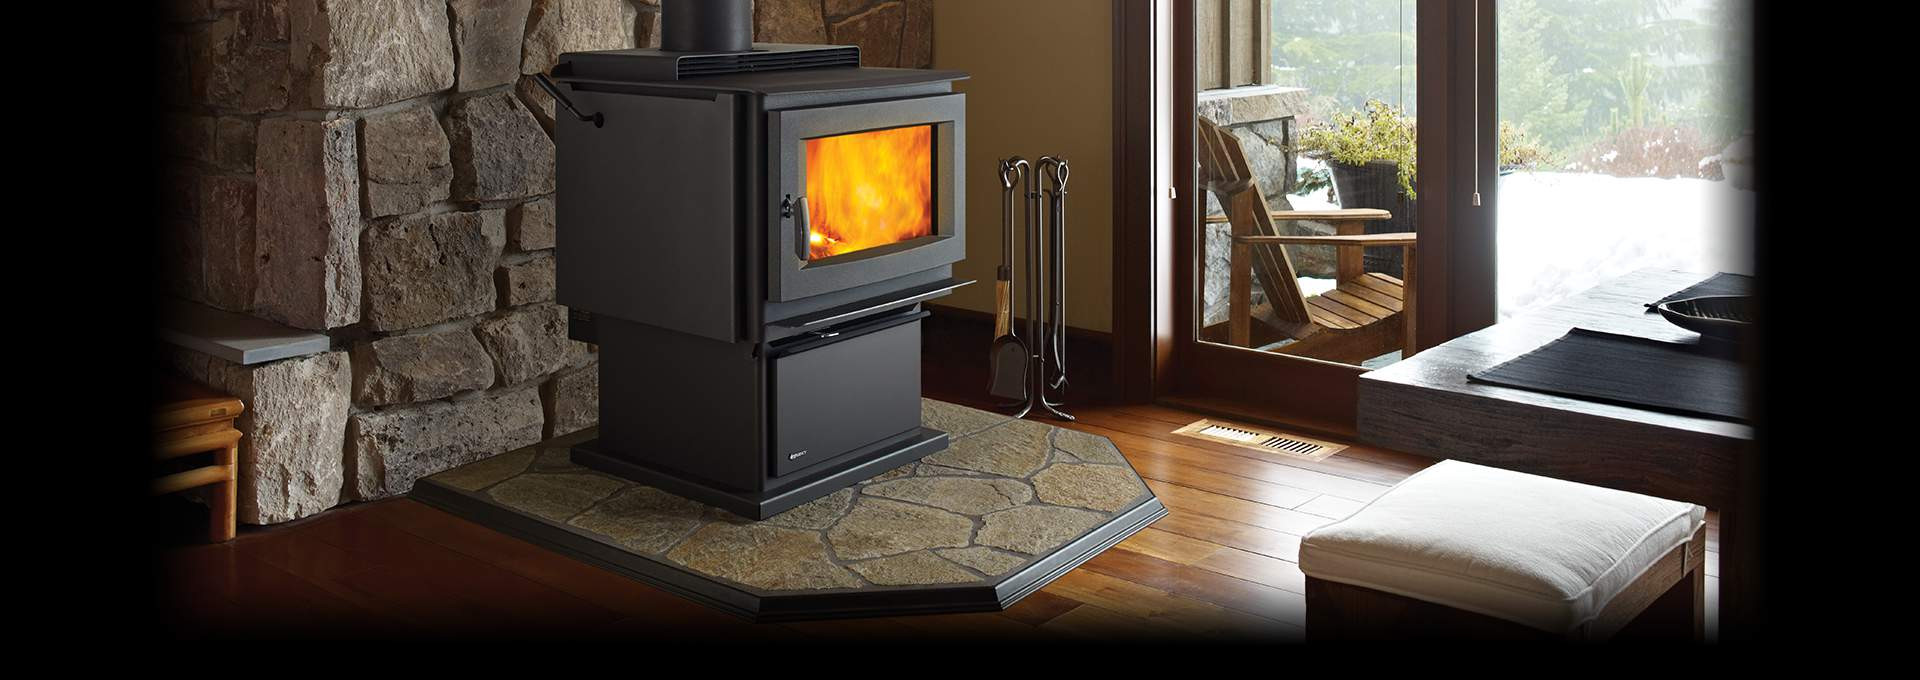 Lowes Fireplace Inserts Awesome 26 Re Mended Hardwood Floor Fireplace Transition